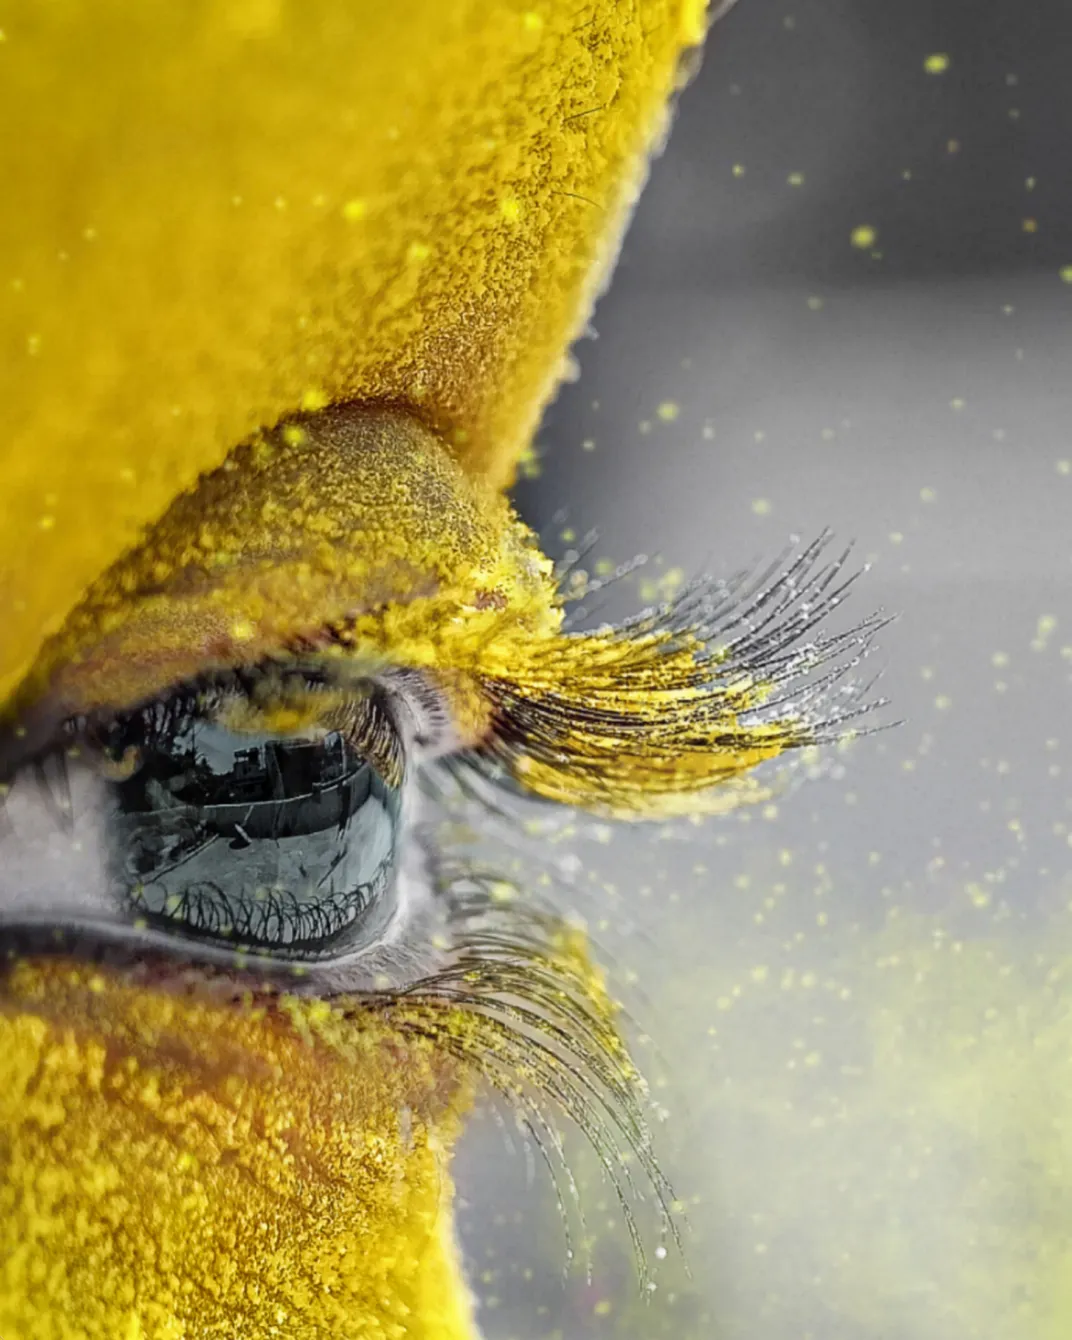 View This Year's 60 Stunning Finalists From the Smithsonian Magazine Photo Contest